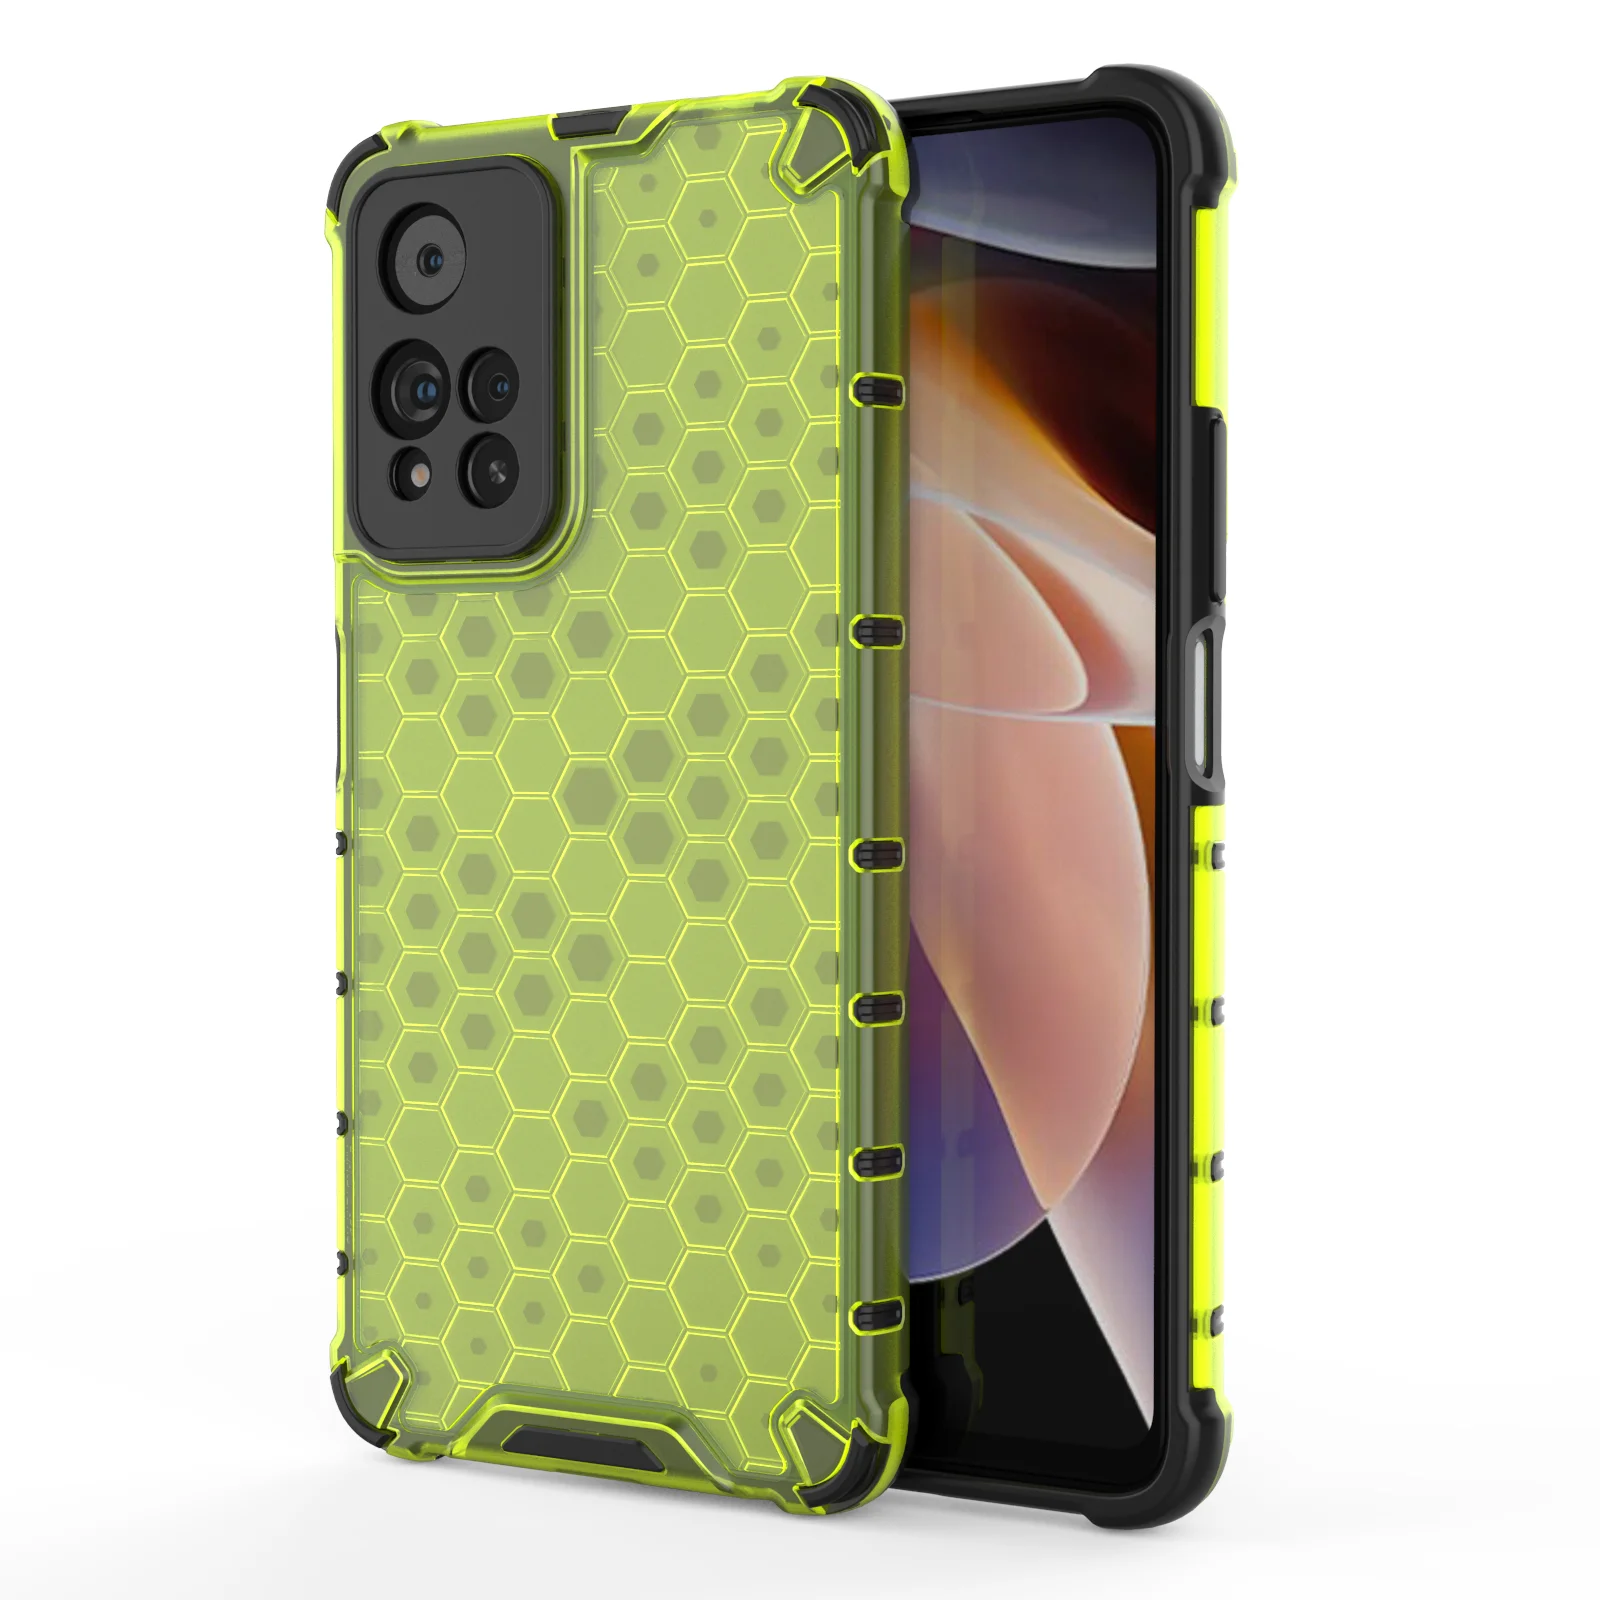 

Hybrid Silicone Hard Case Bumper Cover For VIVO iQOO Z5, As pictures